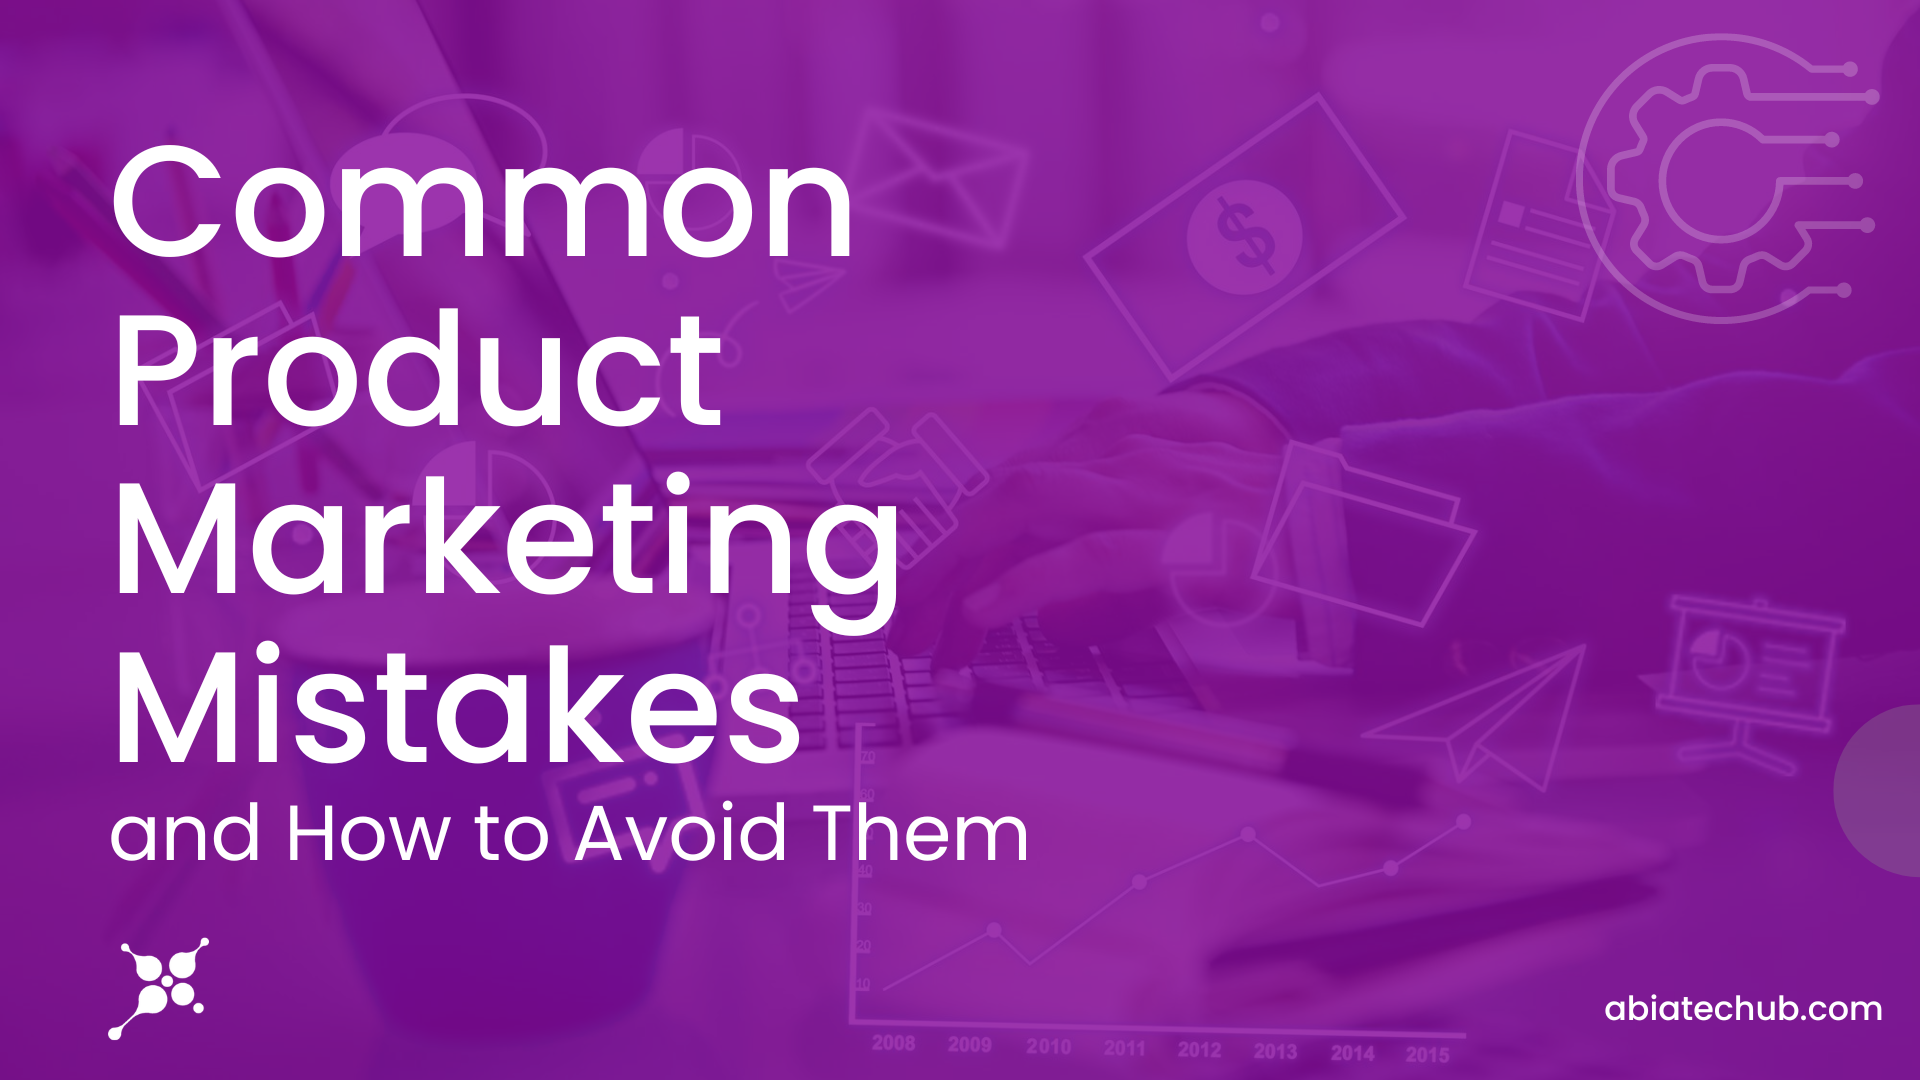 Common Product Marketing Mistakes and How to Avoid Them